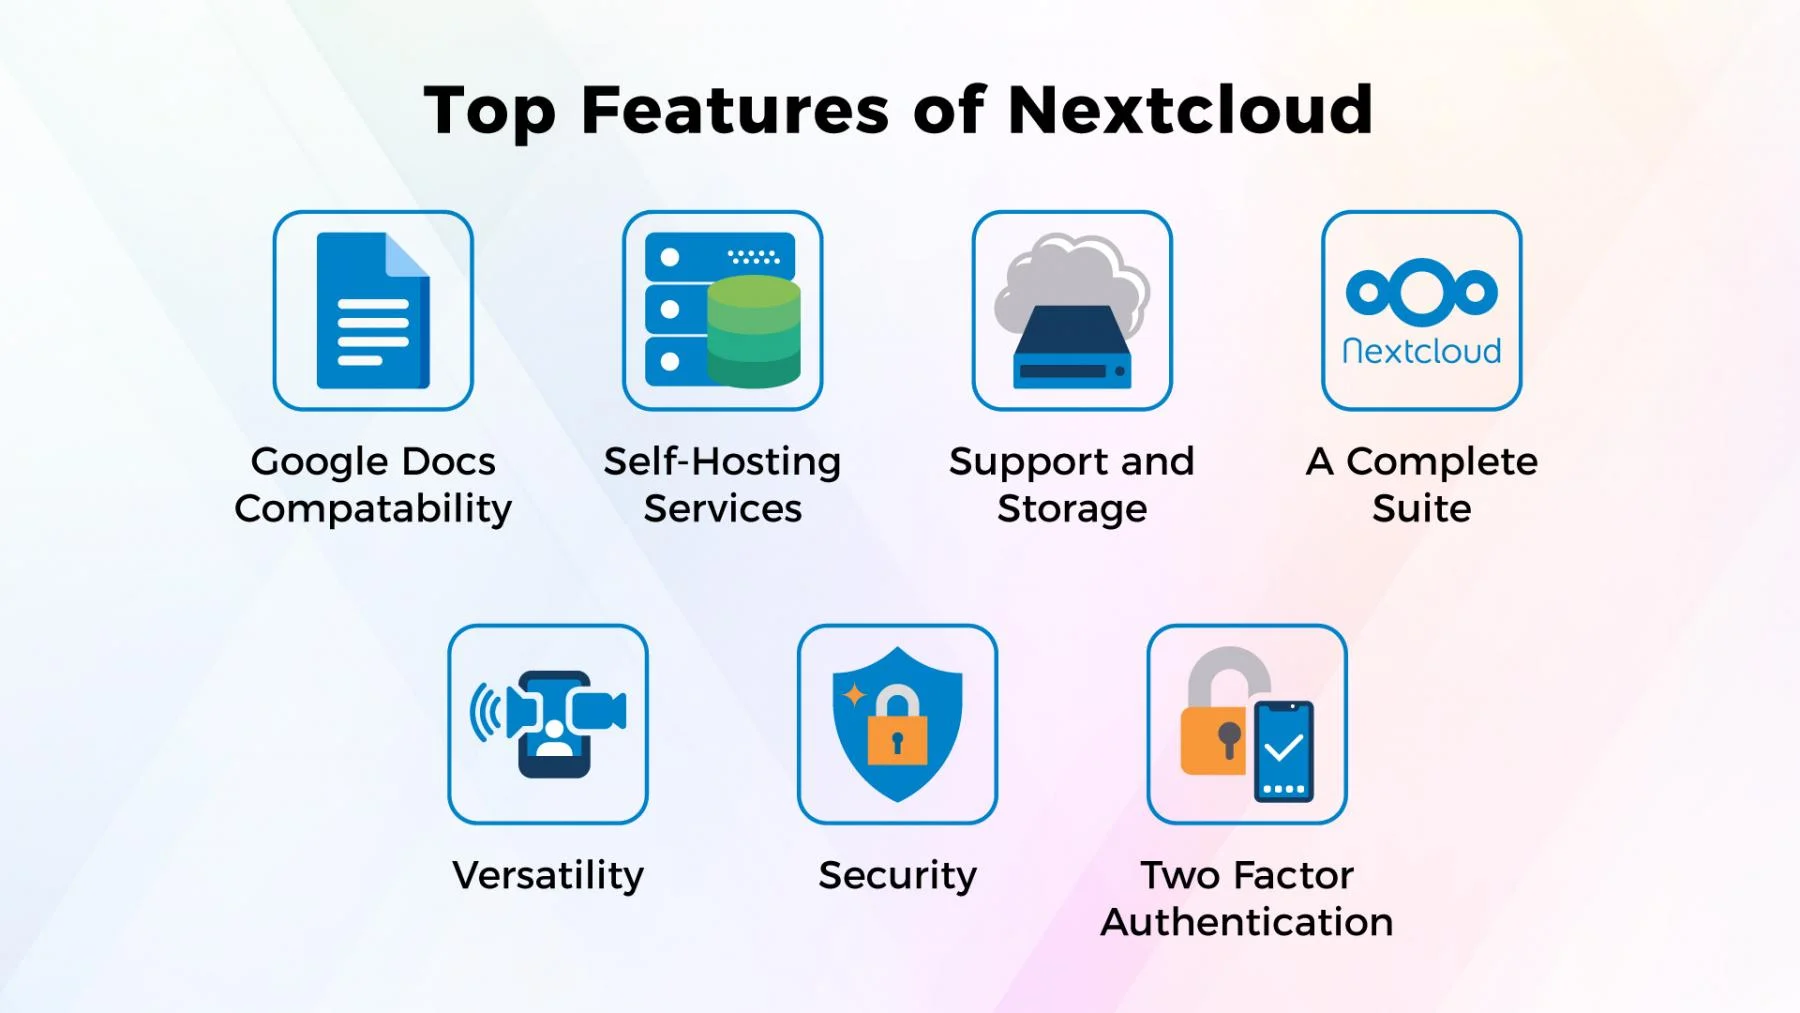 Top 7 features of Next cloud